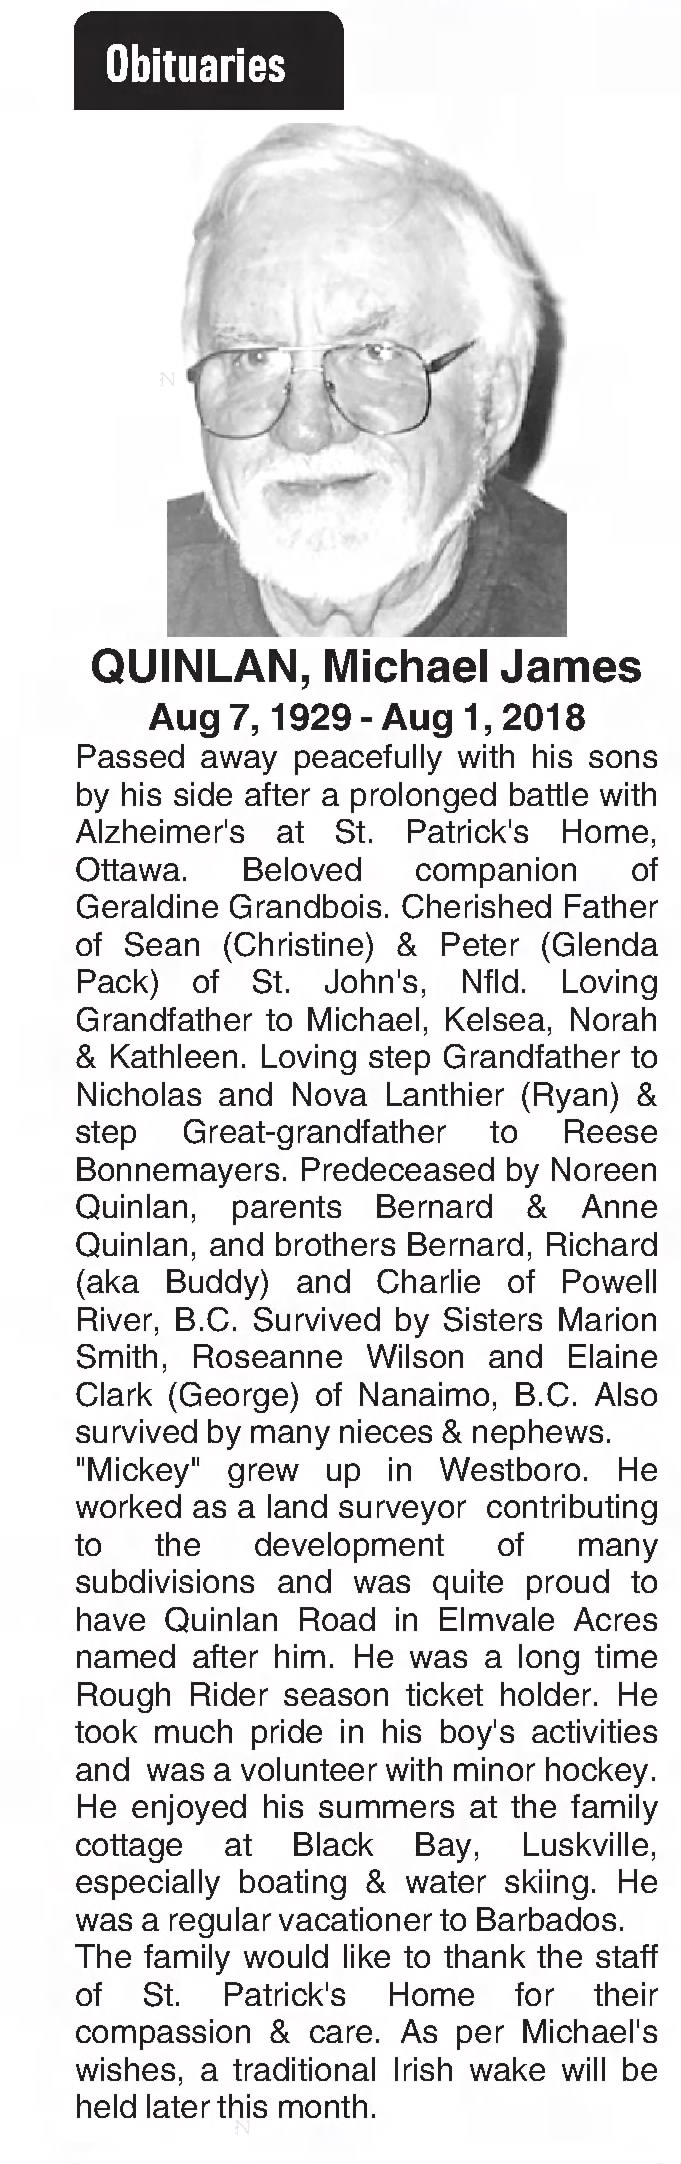 Obituary for Michael James QUINLAN, 1929-2018